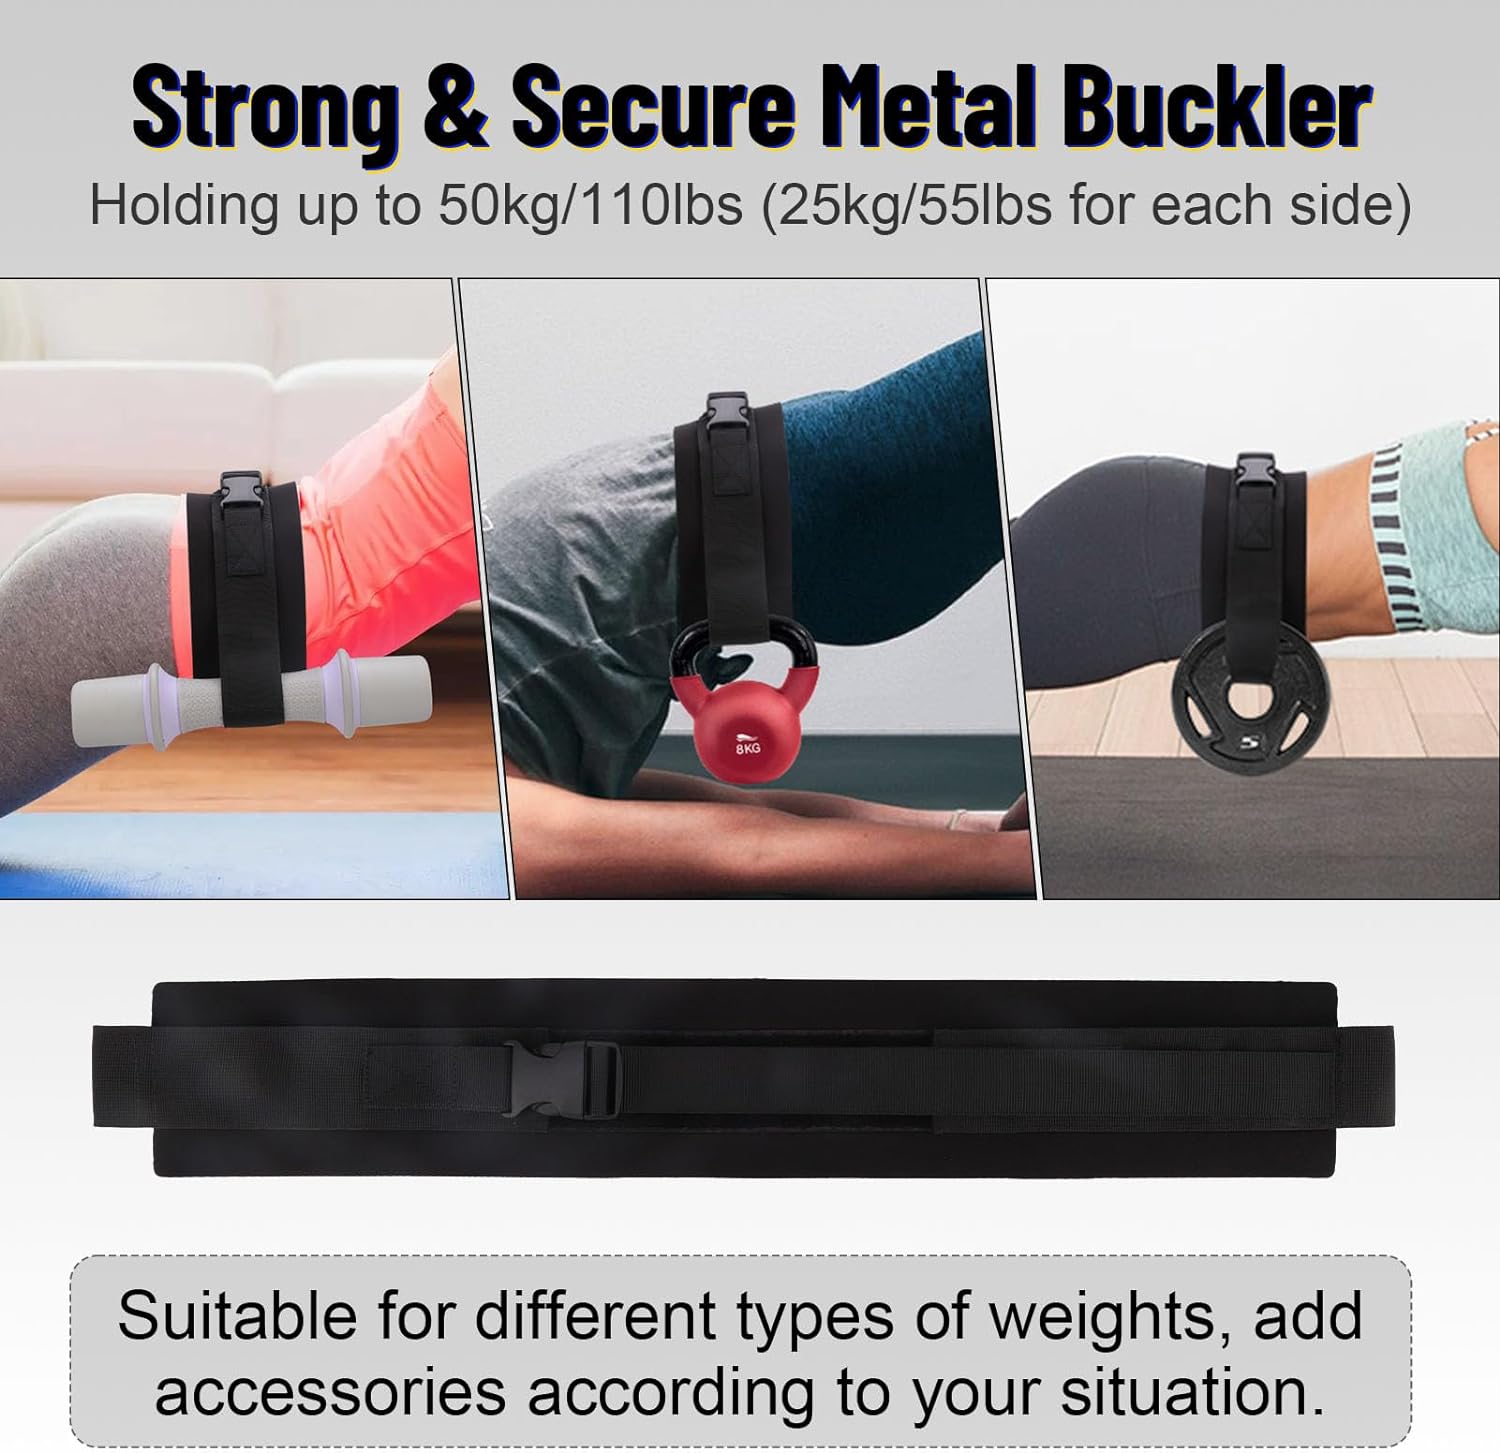 About this item 【New Version Patented Design】The new version has added buckle. Double buckle fixation ensure it wouldn't drop the weight. Holding up to 50kg/110lbs (25kg/55lbs for each side) The connecting straps at both ends of the waist belt can attach 55LB dumbbells or kettlebells, and the padded waist belt in the middle can provide you with a comfortable fit during glute bridge hip exercises.Tips: The package does not include dumbbells 【Exercise Anywhere】Hip Thrust Belt is perfect choice for shoulder and waist weight training, with two belts on the side for dumbbells, kettlebells or grip weight plates, perfect for gym-goers, home workouts, outdoor exercises, and travel.It can effectively work the glutes and leg muscles and excellent choice for strength training. 【Anti-slip Comfort Padding】Our hip thrust belt for dumbbells is made of soft extended non-slip sponge padding and high-quality , Eliminates unnecessary pain associated with exercise, not easy to slip off.Keep you safe during your workout and rests perfectly on your hips. New adjustable length fixation strap allows for a flexible and comfortable fit for waist sizes ranging from 23.6-59 inches. 【Easy to Use】The hip thrust straps is only require 2 steps to starting the hip thrust exercise. Simply open the two straps on both sides, loop the straps through your weights likes dumbbells/kettlebells, and secure them with the buckle to start your training.